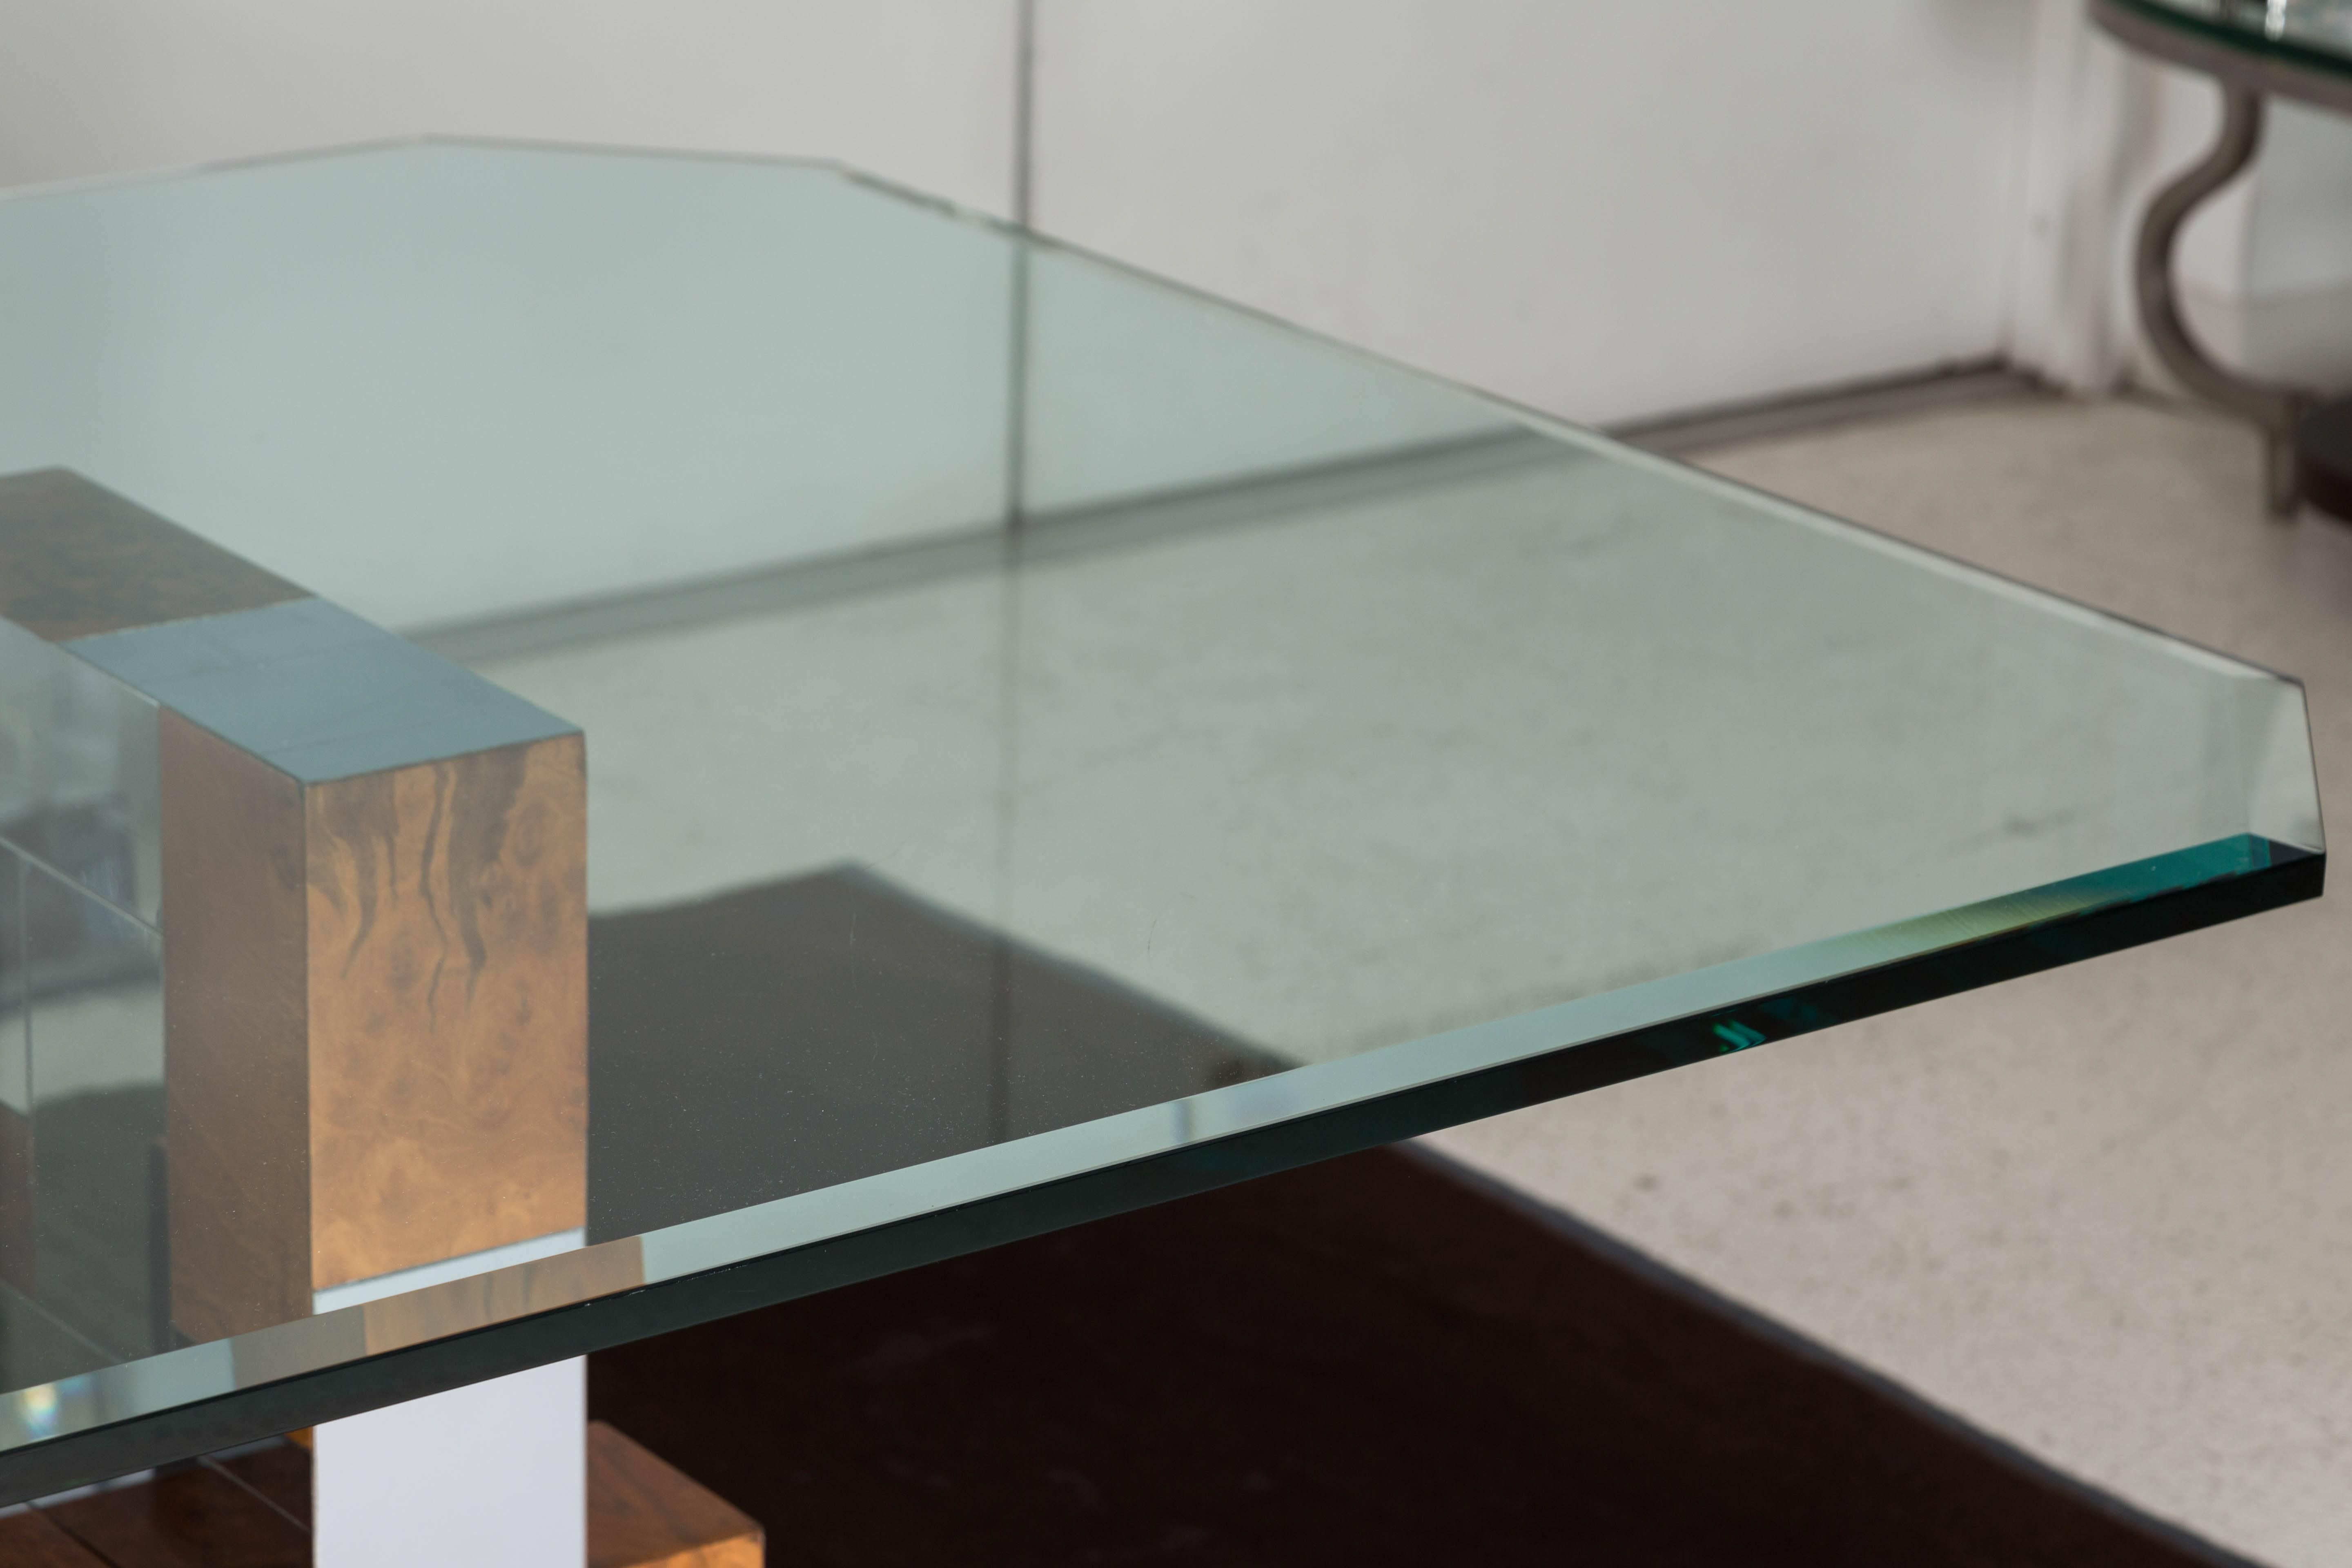 Magnificent dining table in burl walnut, chrome-plated steel and glass from Paul Evans Cityscape Series designed for the Directional Furniture Co. The measurements listed below are for the overall size of the tabletop. The base itself measures